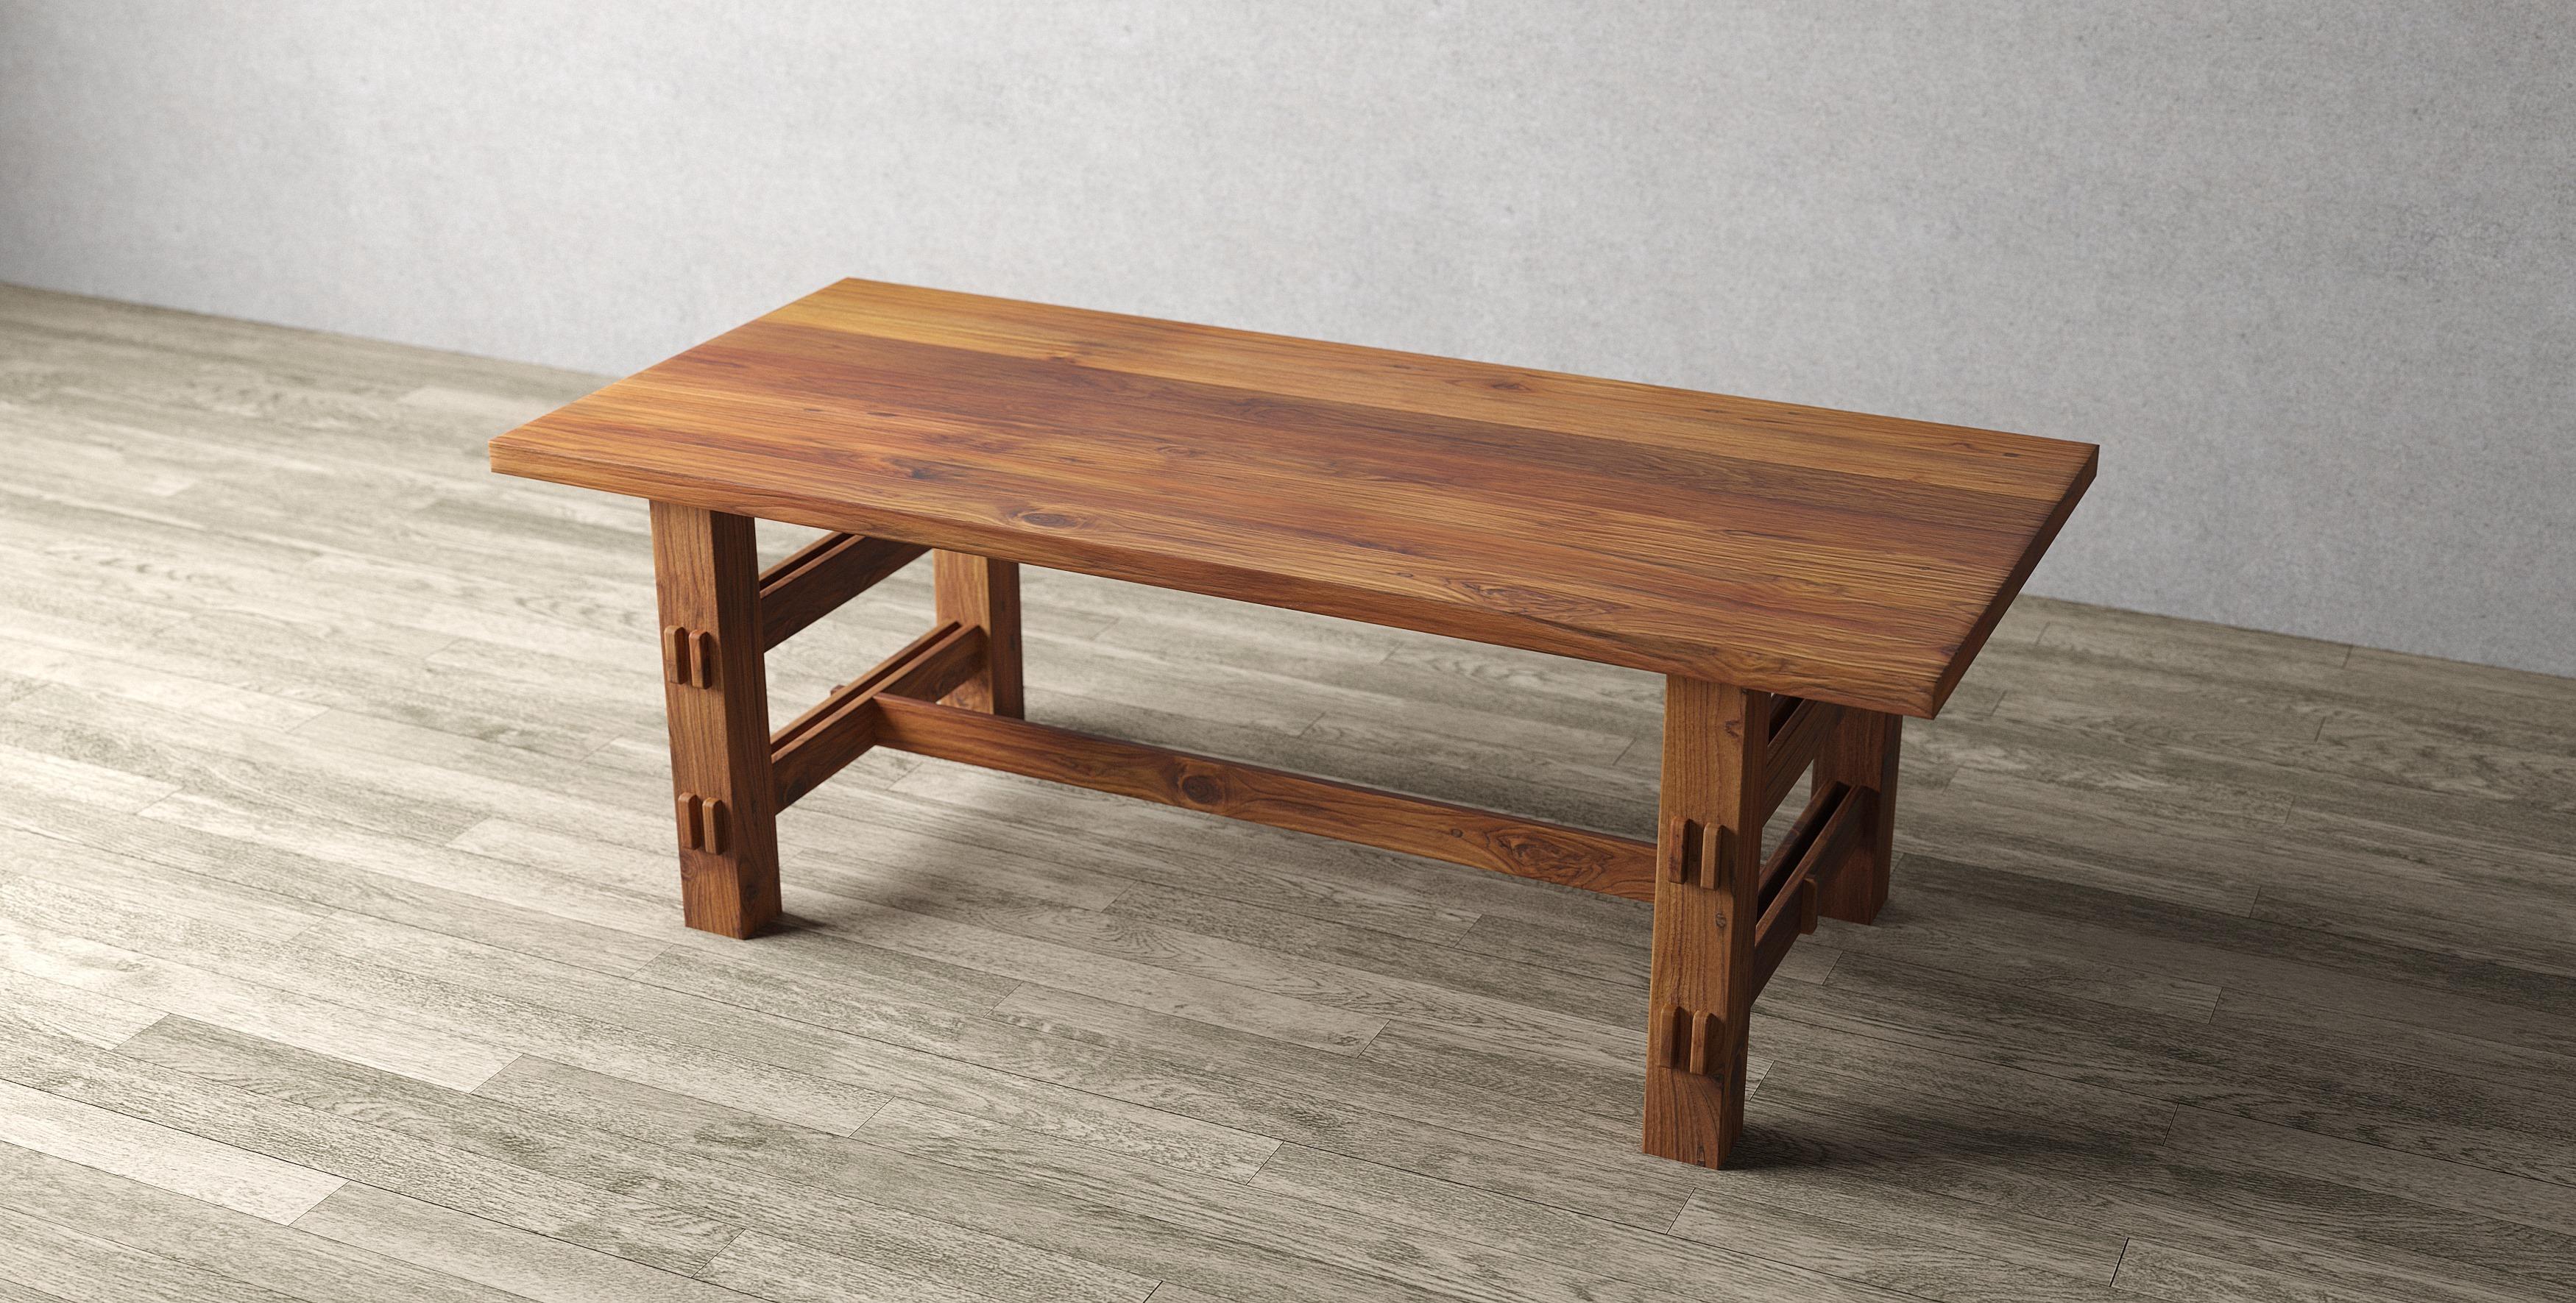 This table celebrates the natural beauty of solid wood with straightforward modern rustic styling. The simplicity of the design and subtle details make this a stunning addition to any home providing beauty that will last for decades.

The Table